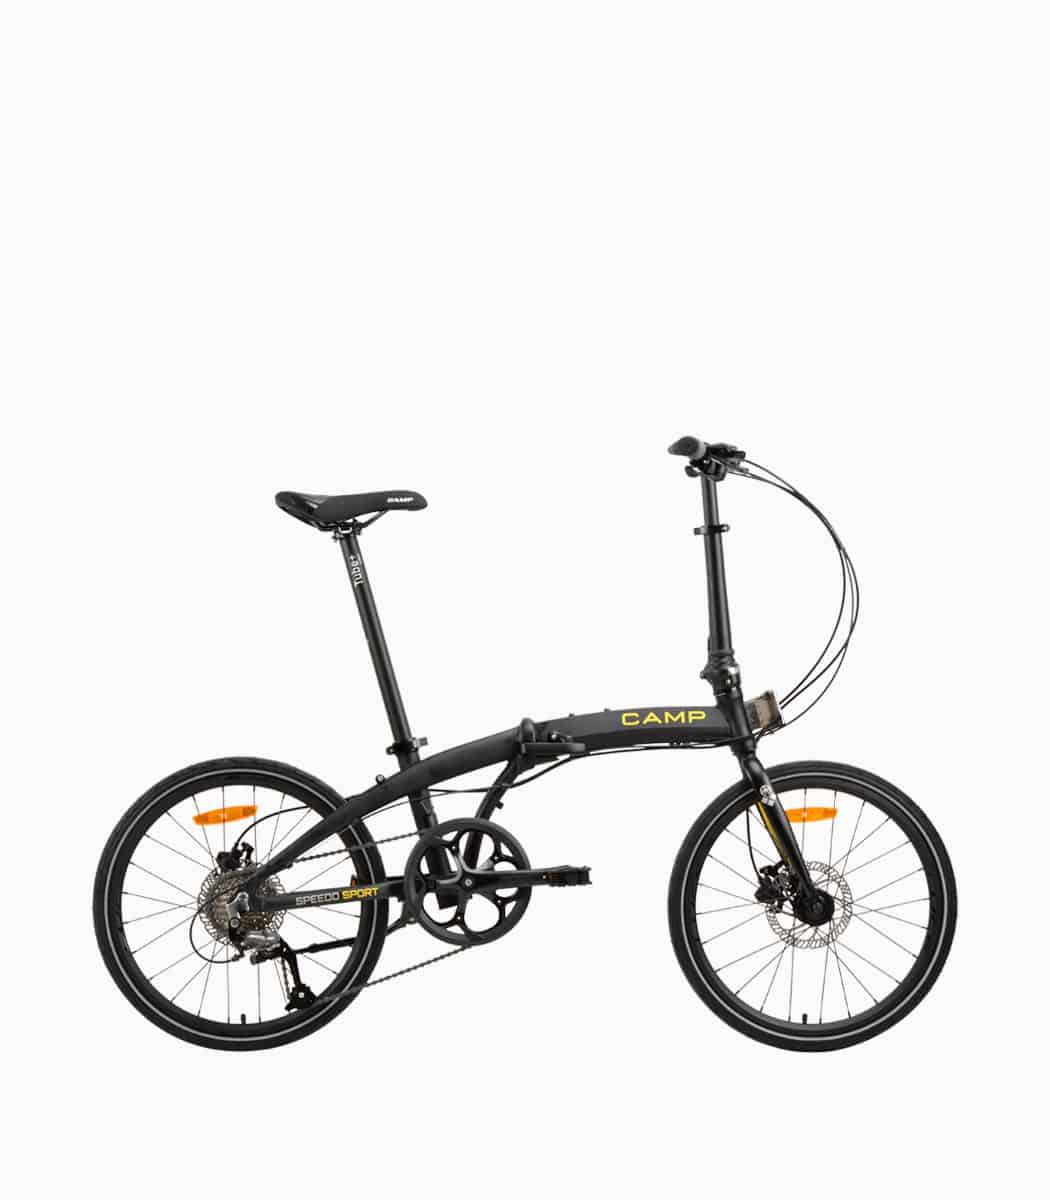 CAMP Speedo Sport (BLACK) foldable bicycle 2023 edition right